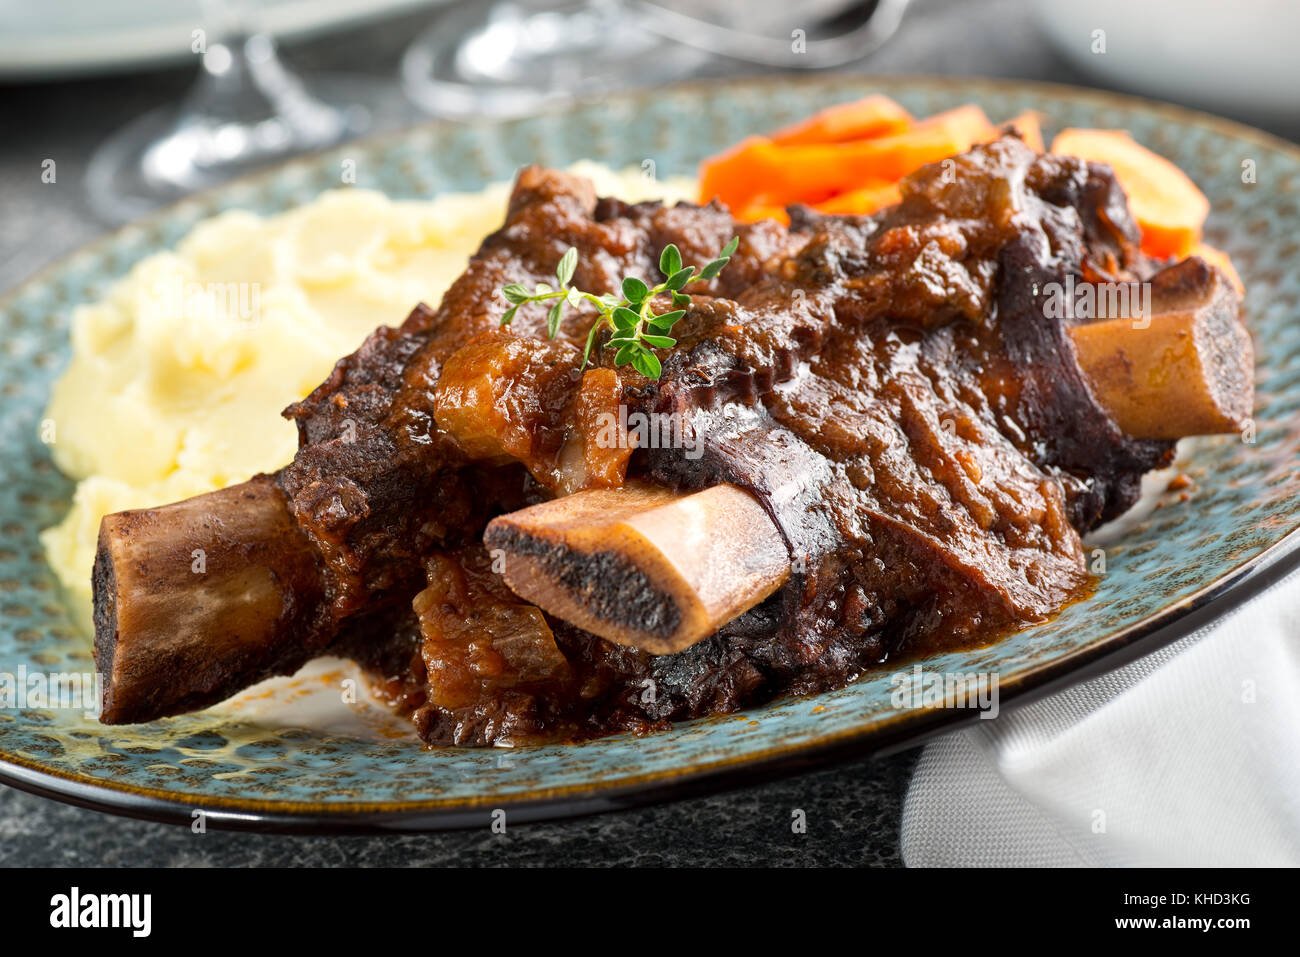 Delicious braised beef ribs with mashed potato and carrots. Stock Photo